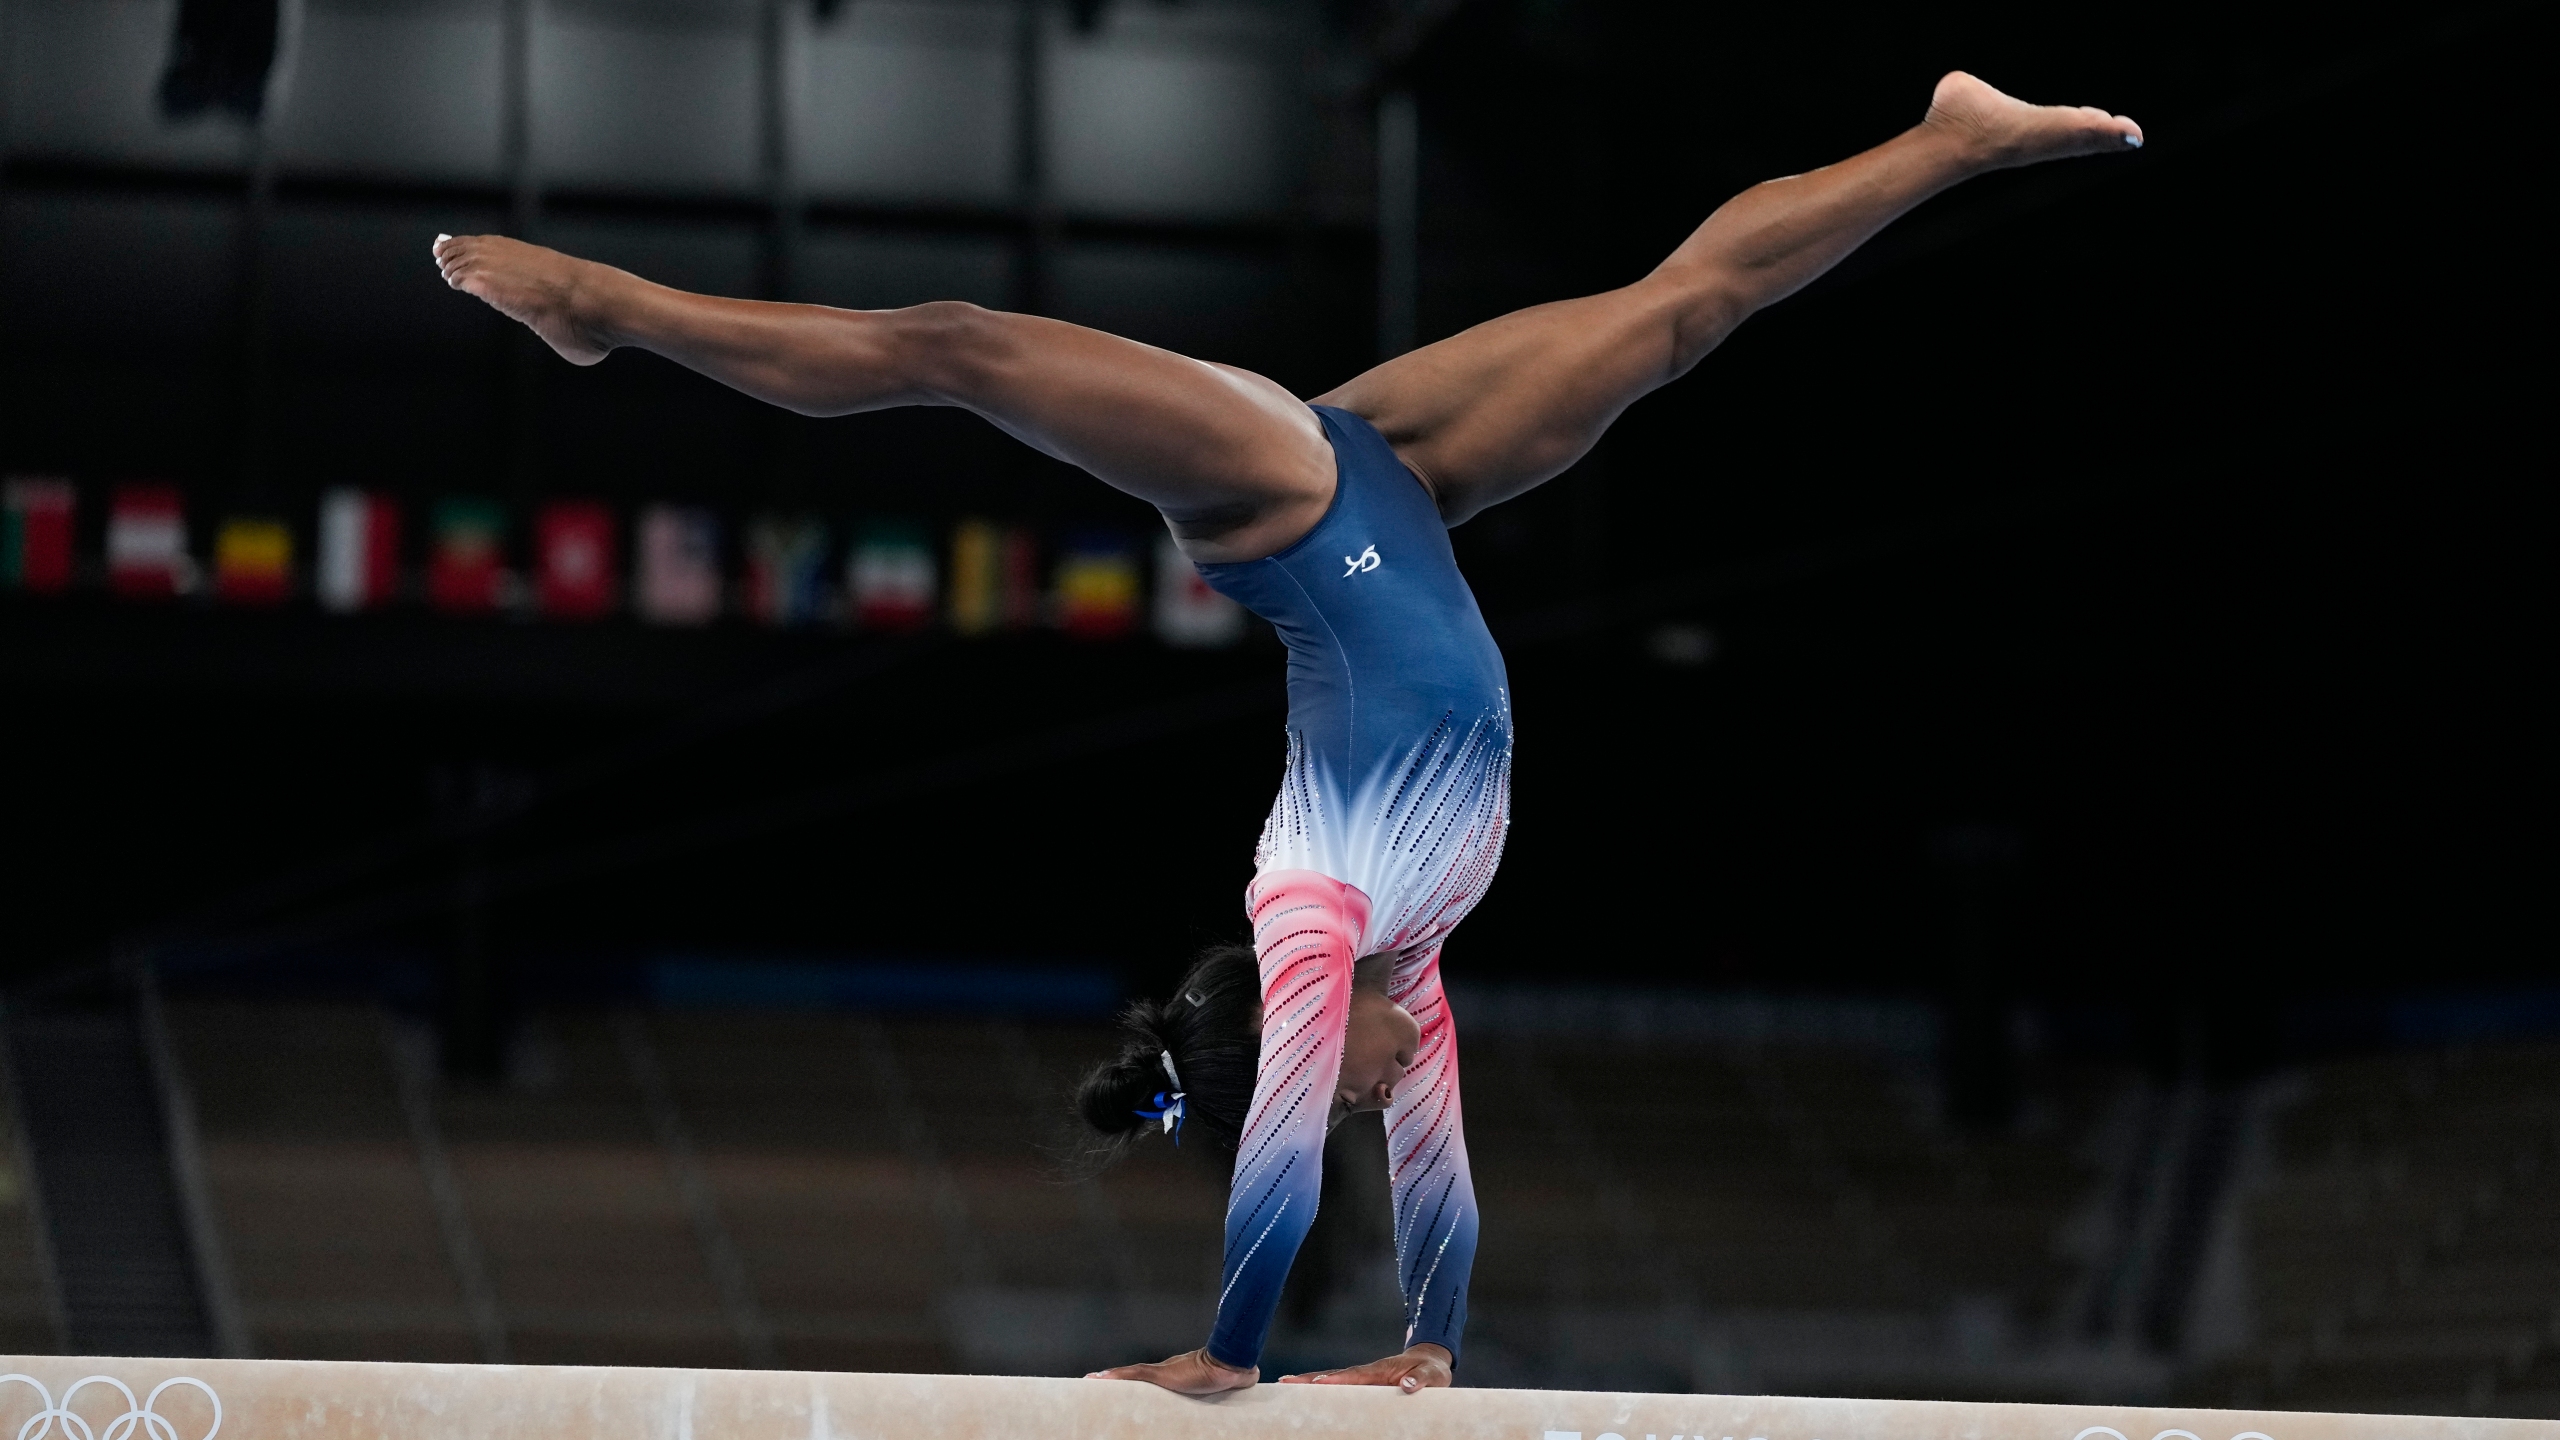 Biles returns to Olympic competition, wins bronze on beam. KRQE News 13